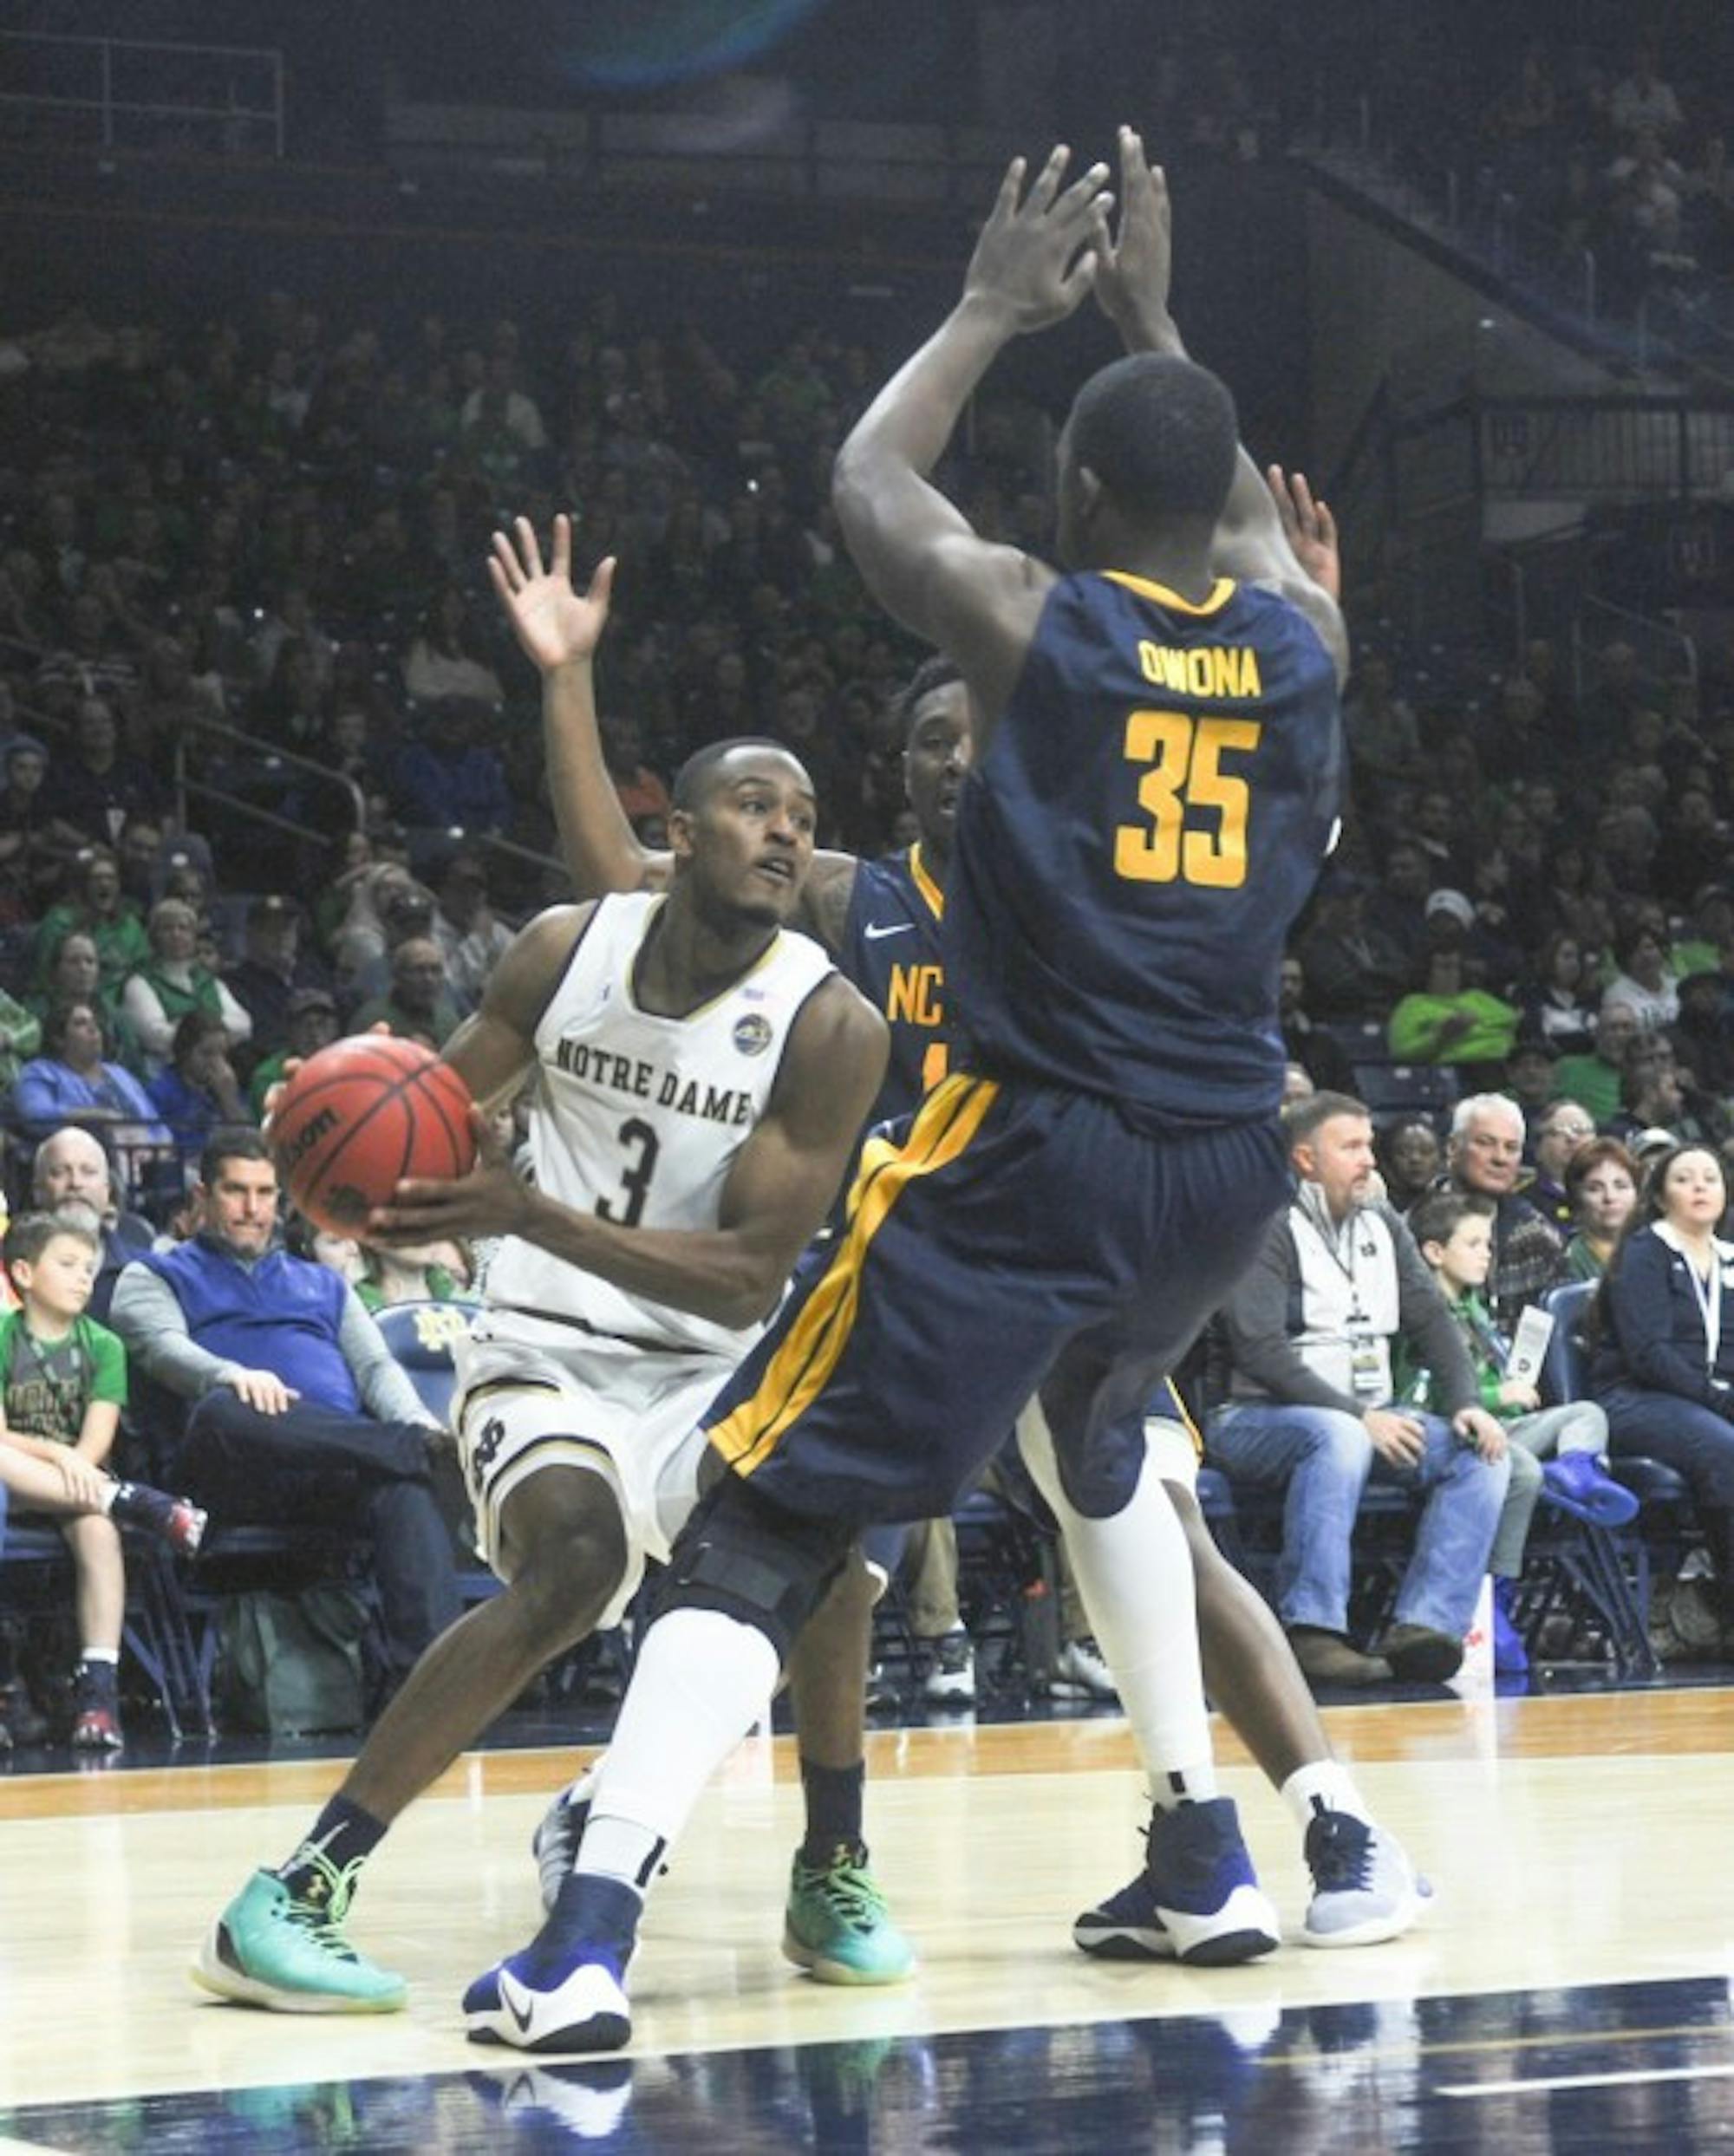 Irish senior forward and captain V.J. Beachem looks to escape a baseline trap during Notre Dame’s 107-53 win over North Carolina A&T on Sunday at Purcell Pavilion. Beachem had 19 points in the win.